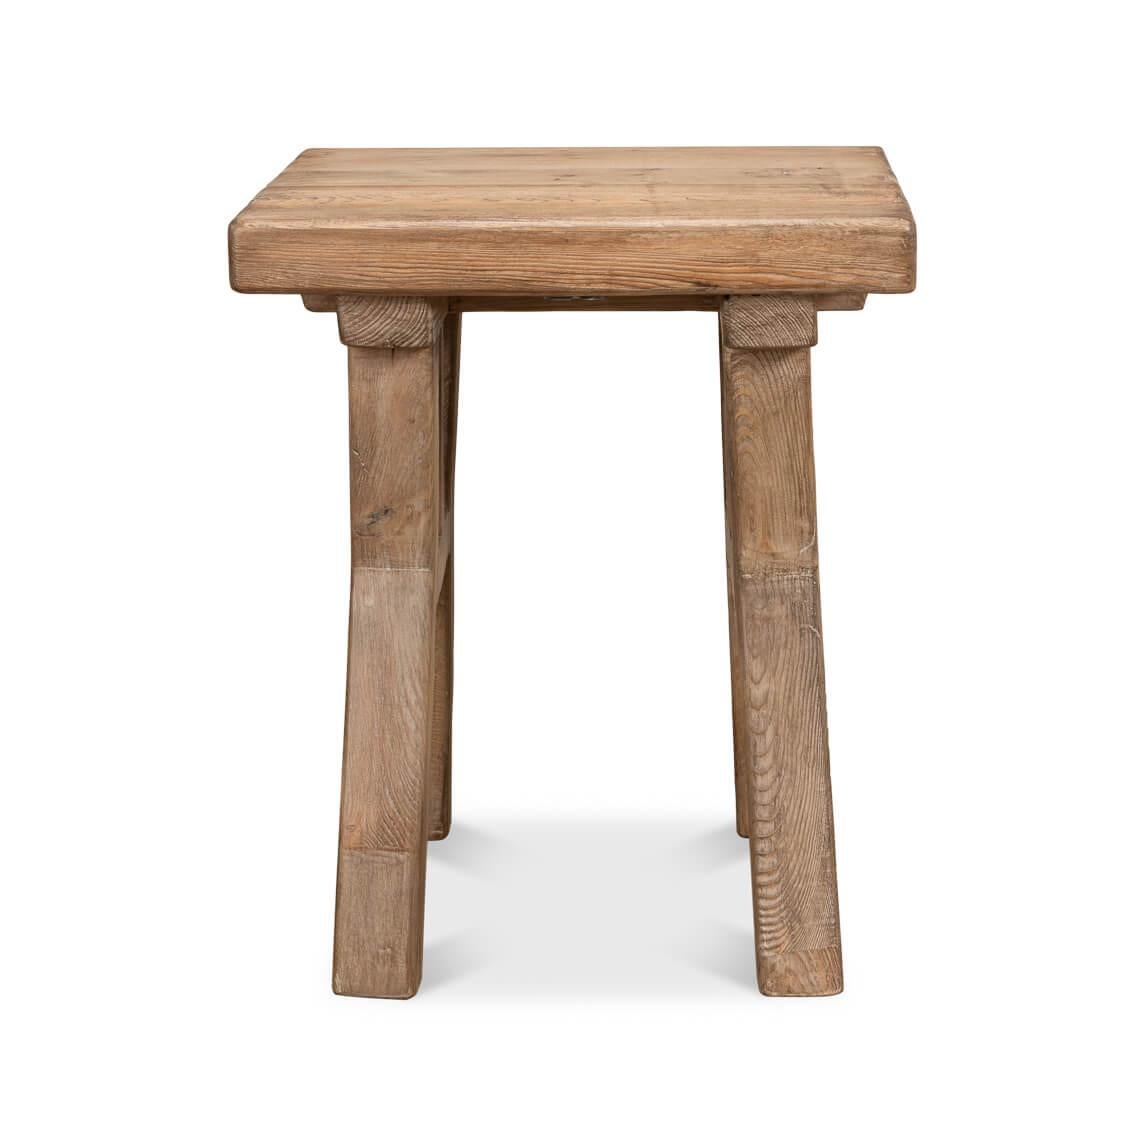 Contemporary Rustic Reclaimed Wood Accent Table For Sale